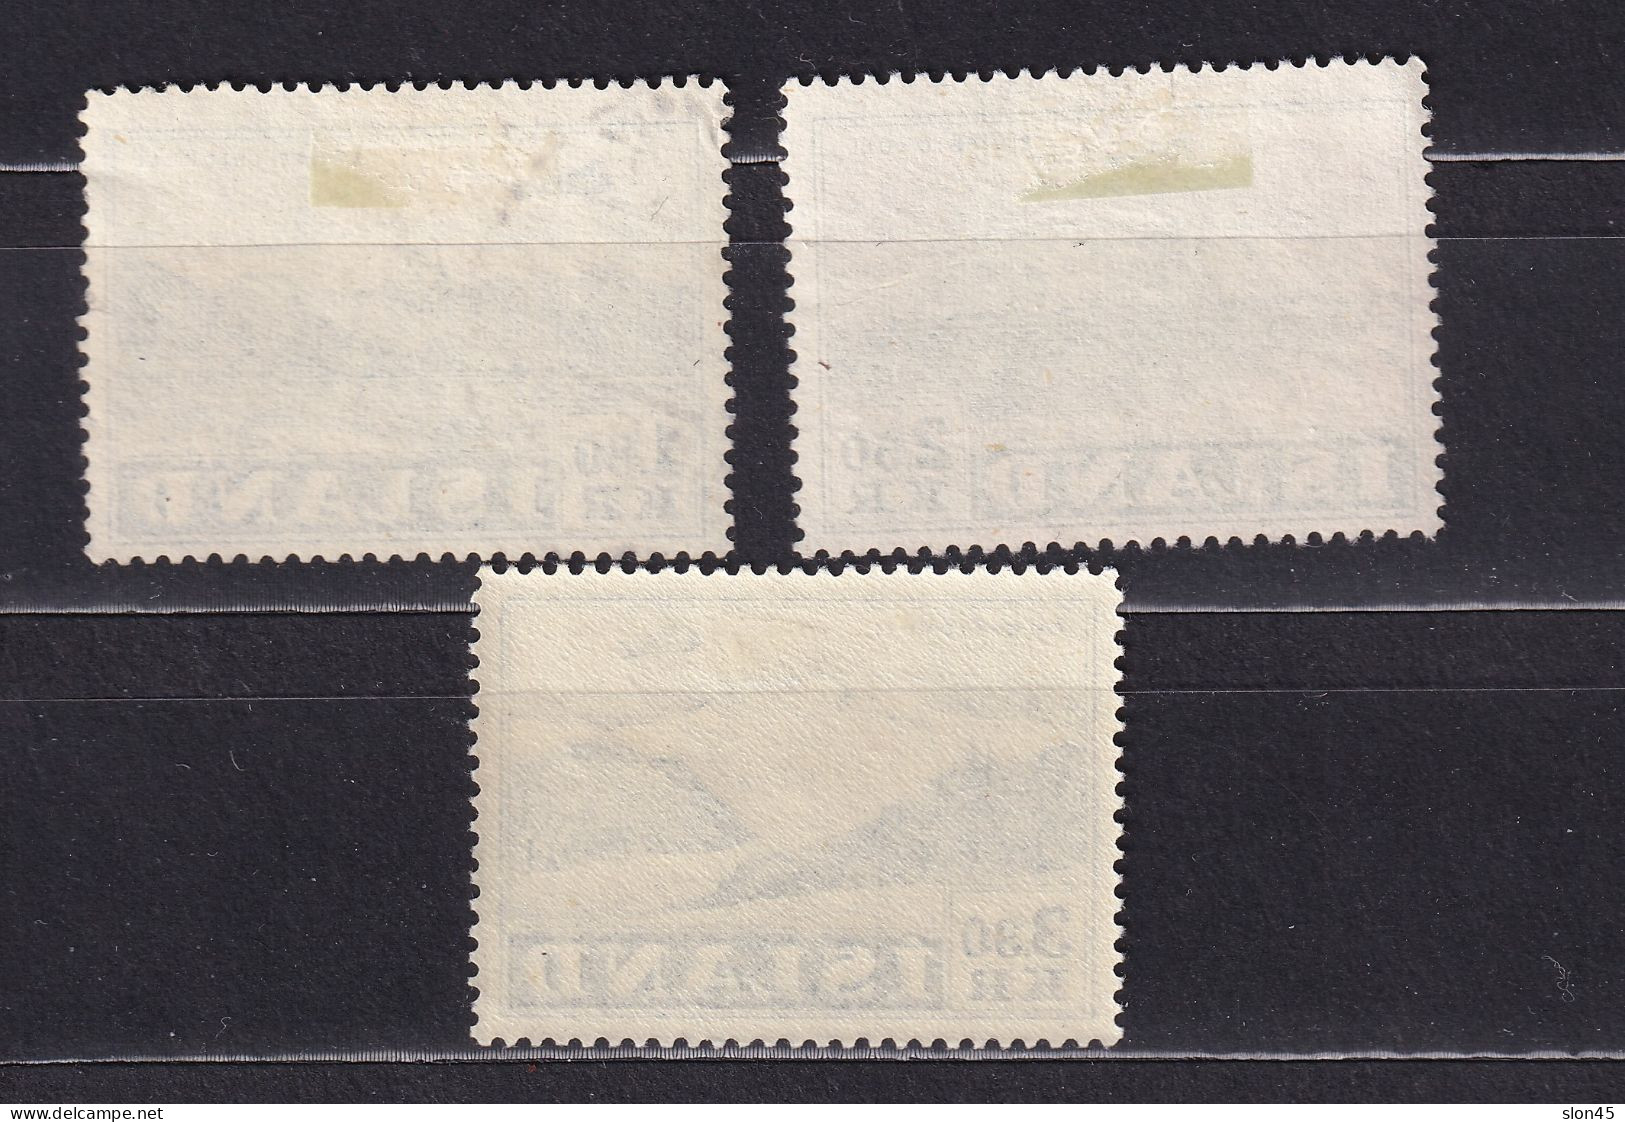 Iceland 1952 Air Post MH/Used Sc C27-9 15676 - Gebraucht